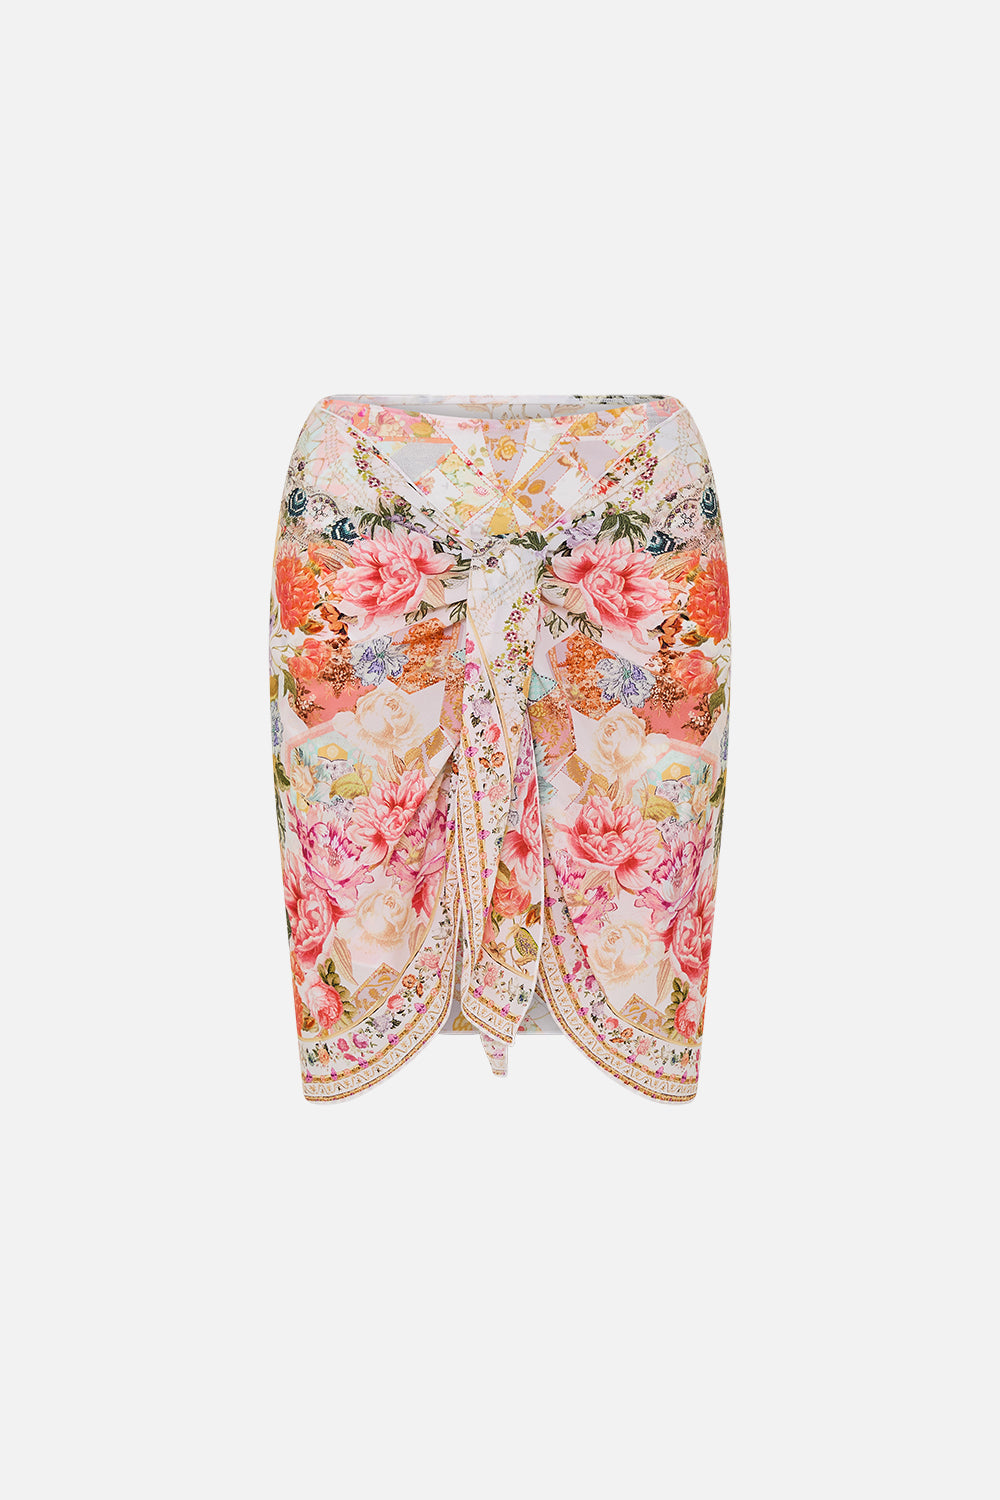 CAMILLA floral layered short sarong with tie front in Sew Yesterday